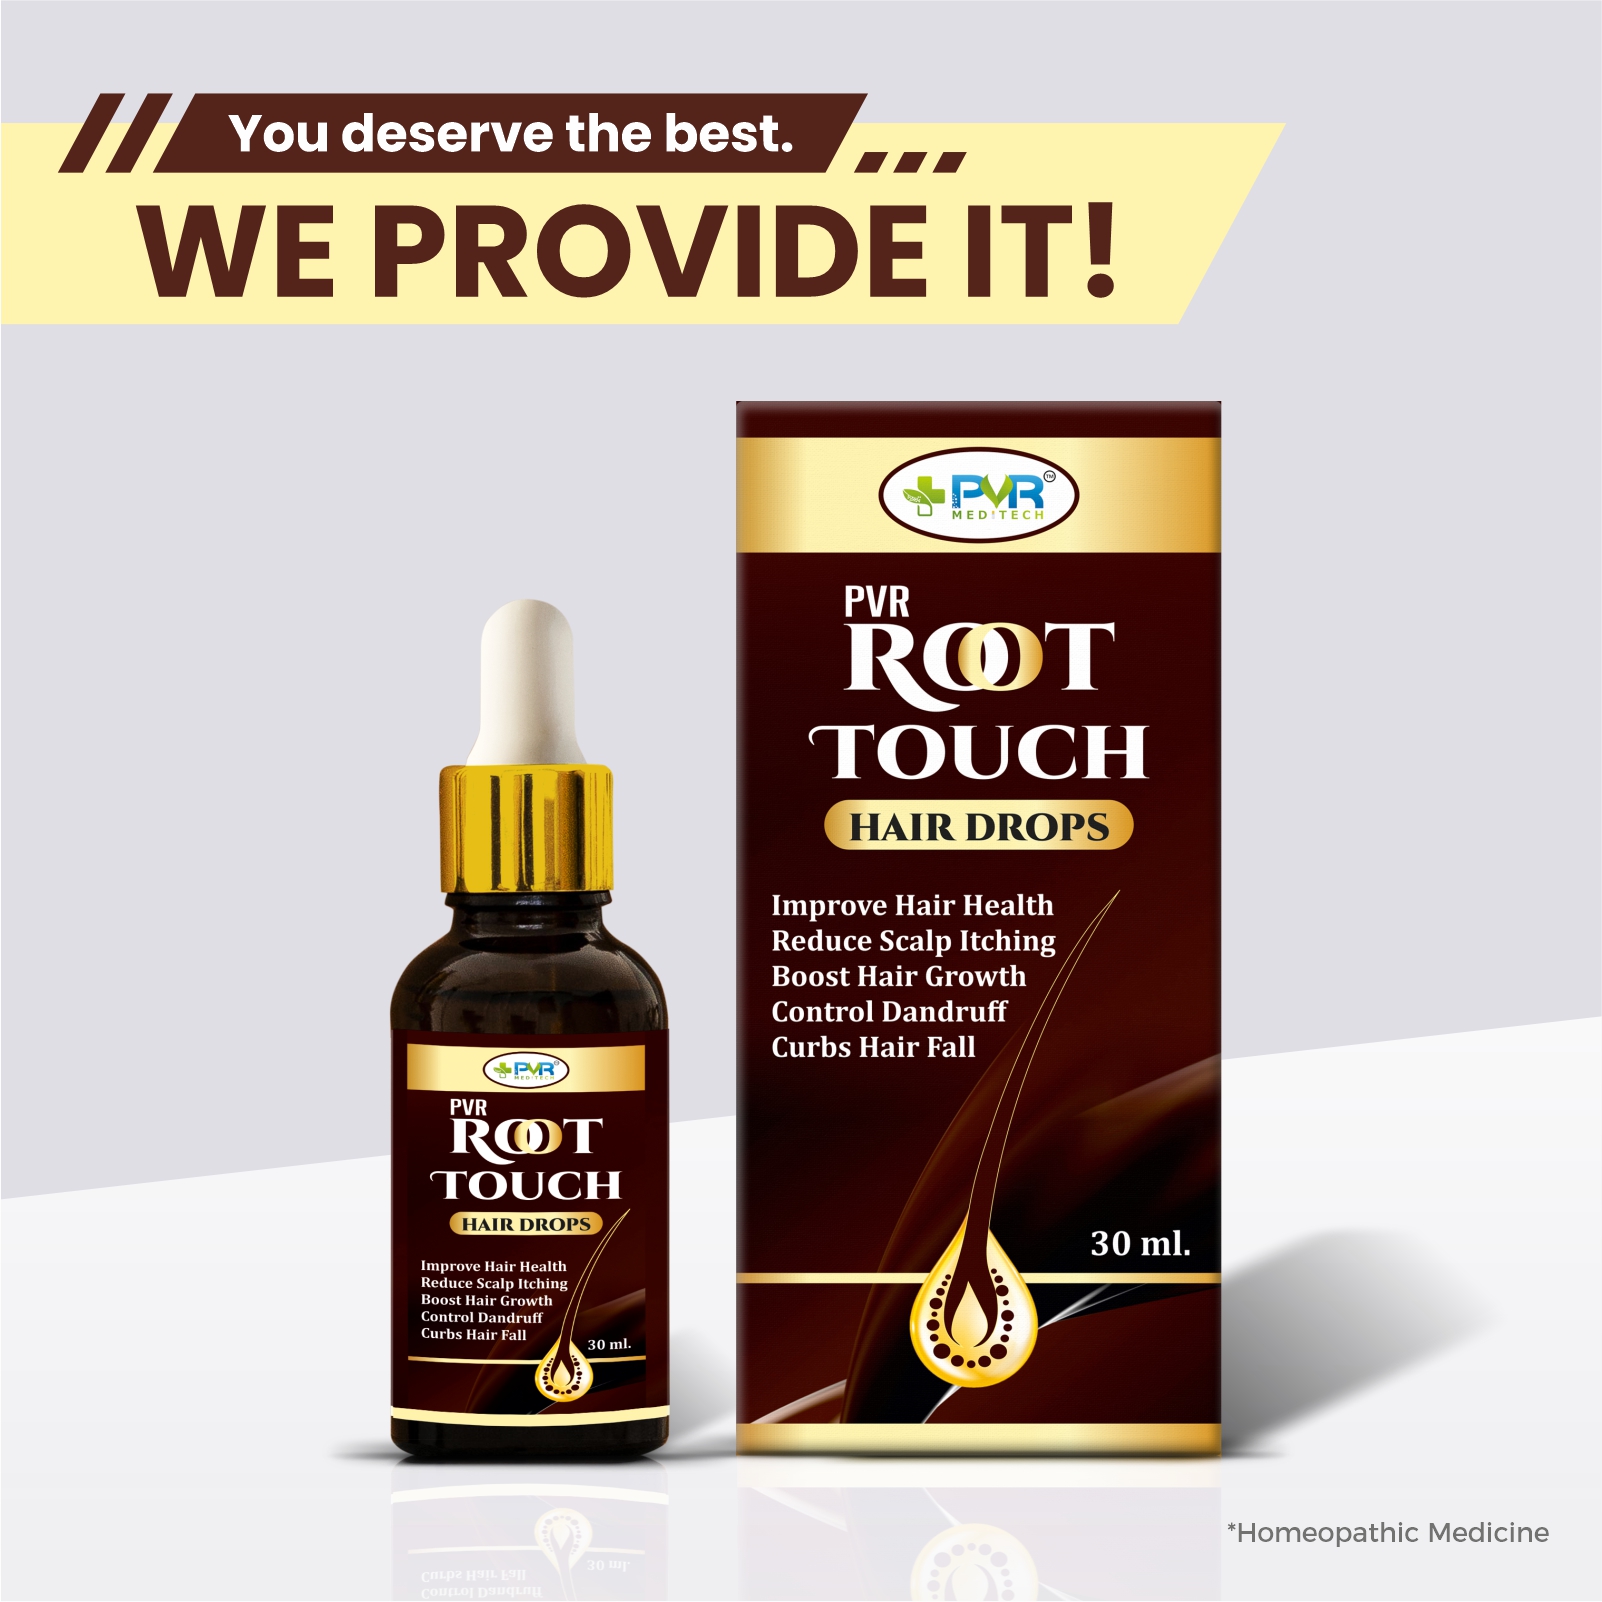 PVR Root Touch Hair Drops - Meditech Homeo Care